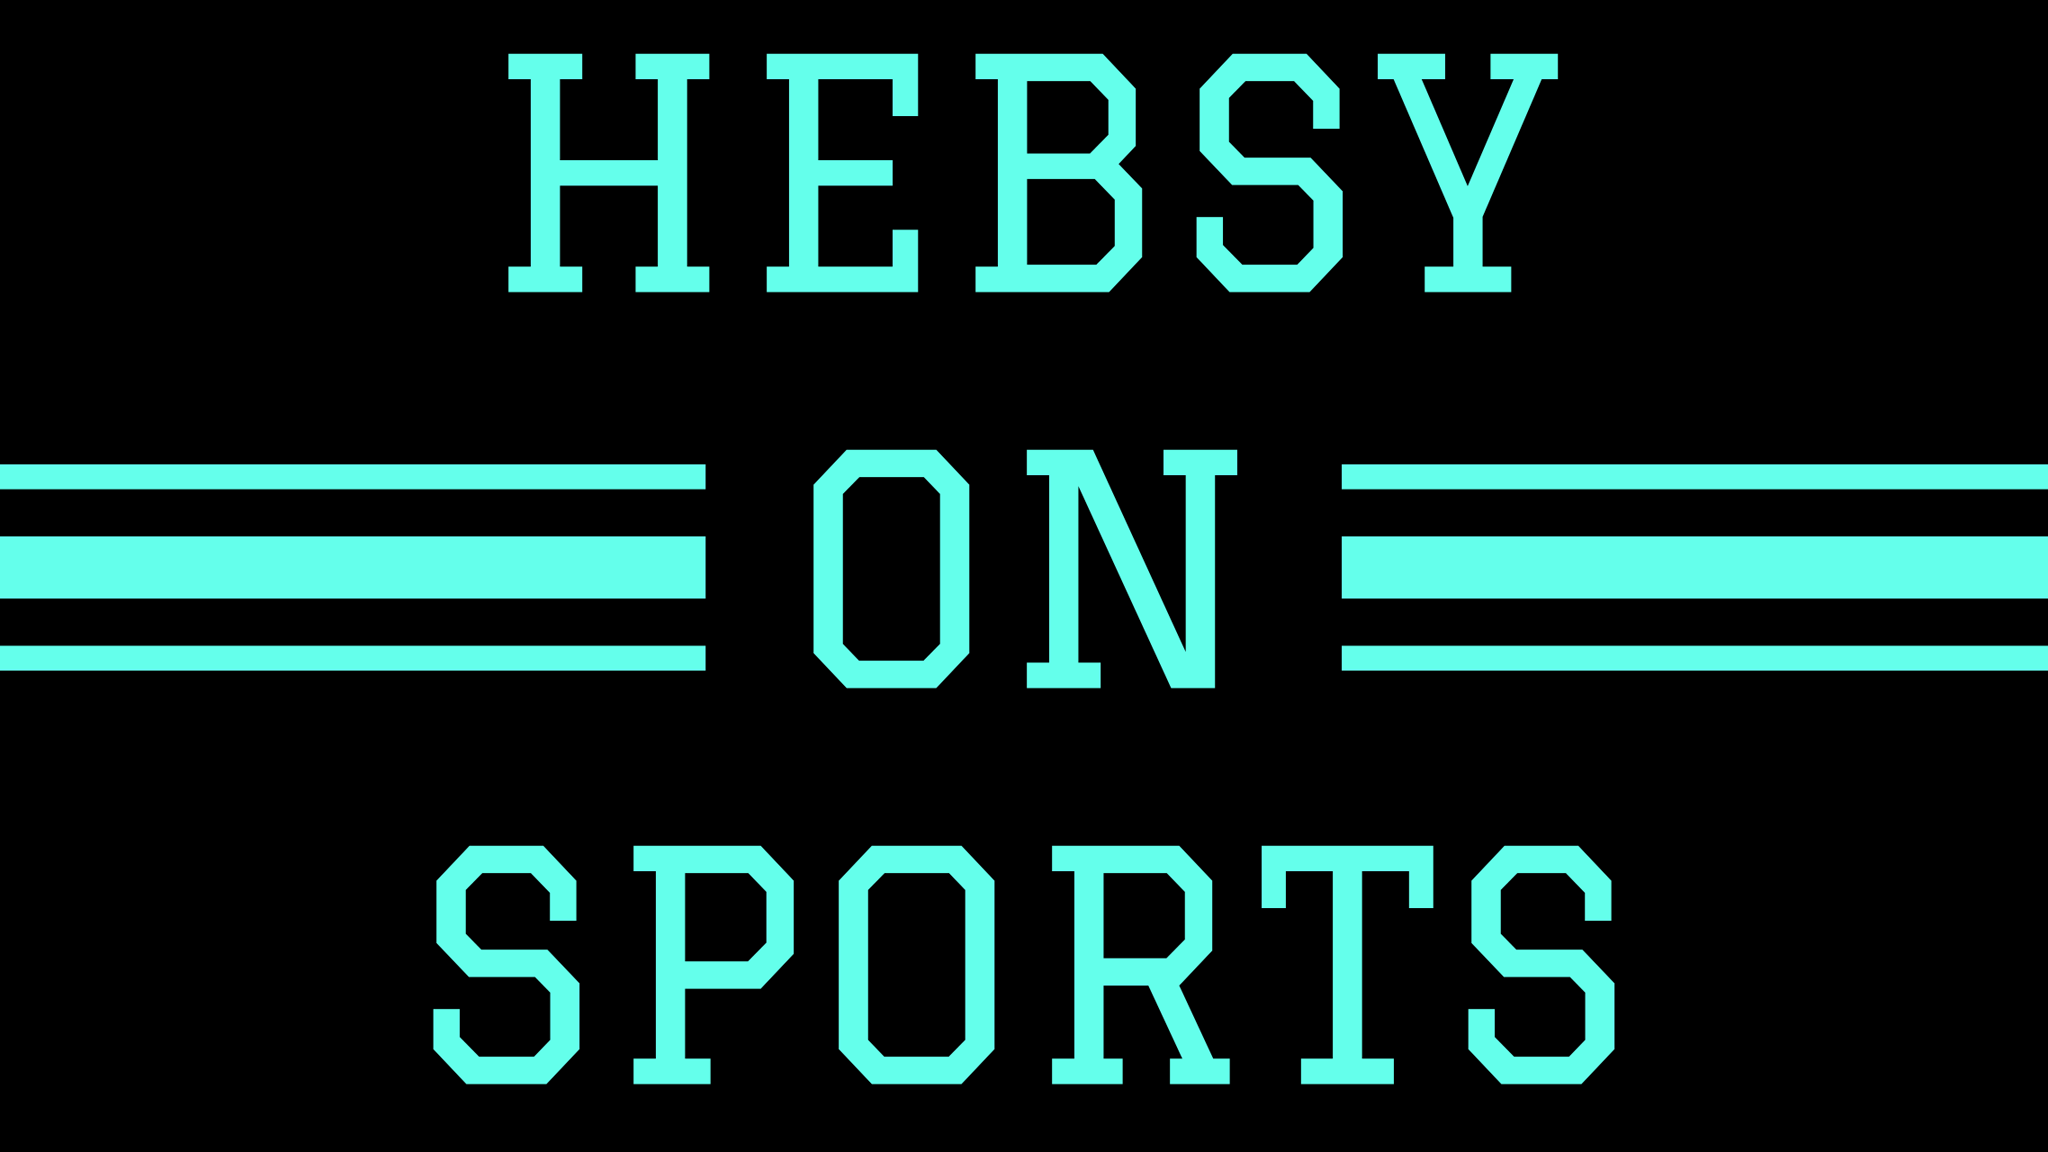 Hebsy on Sports for June 25, 2021